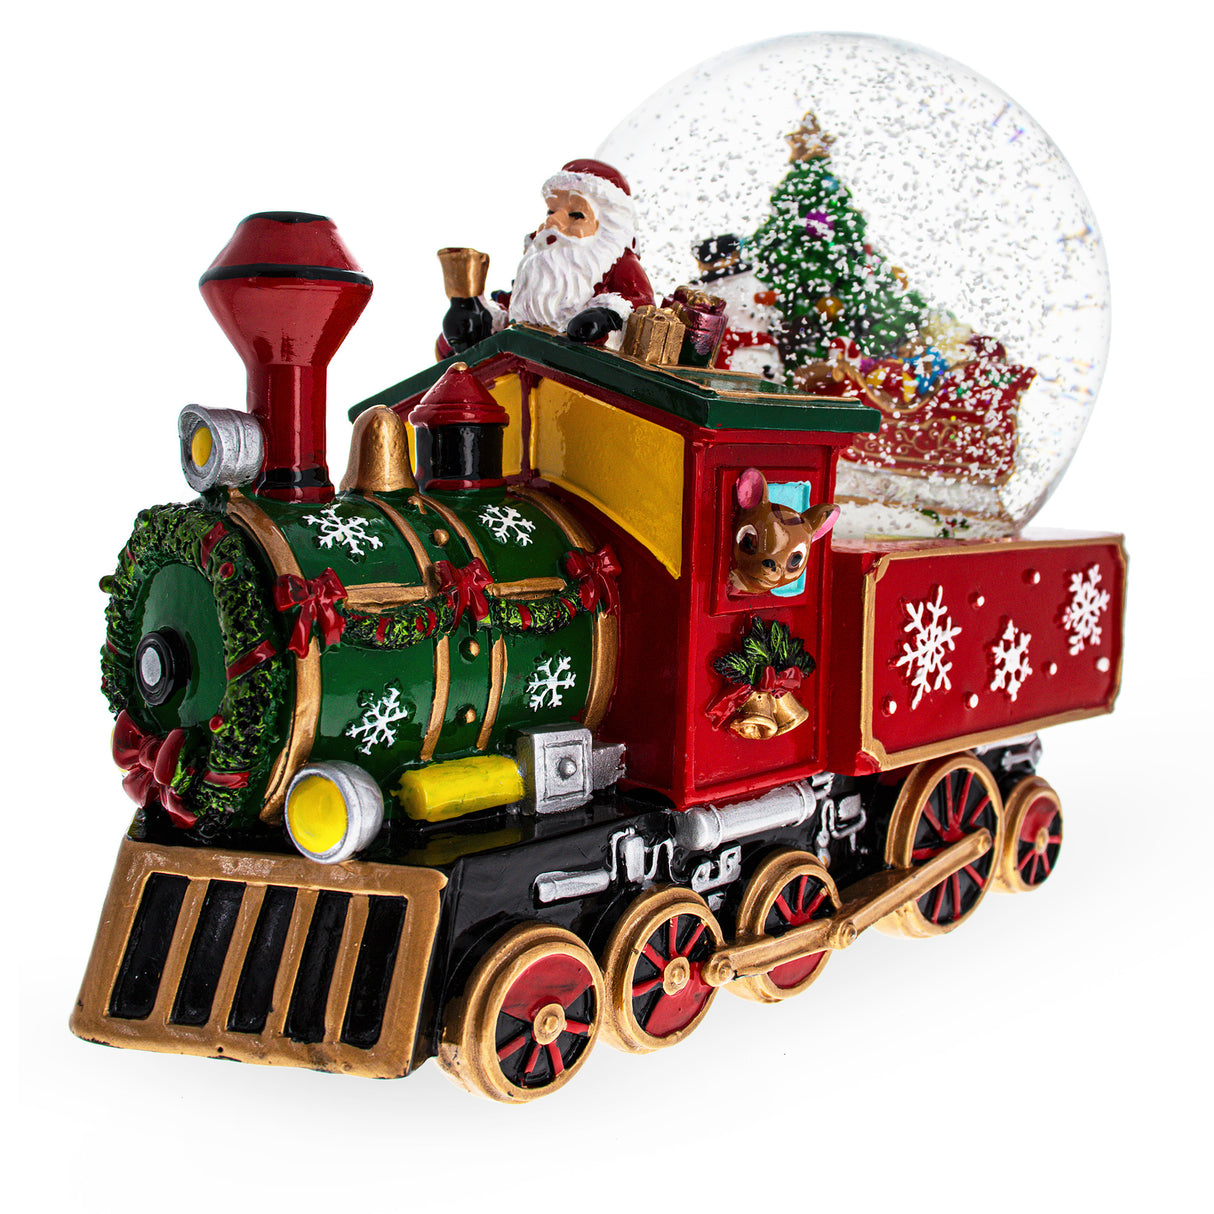 Resin Festive Train Express: Musical Water Globe with Santa, Snowman, and Reindeer Delivering Tree in Red color